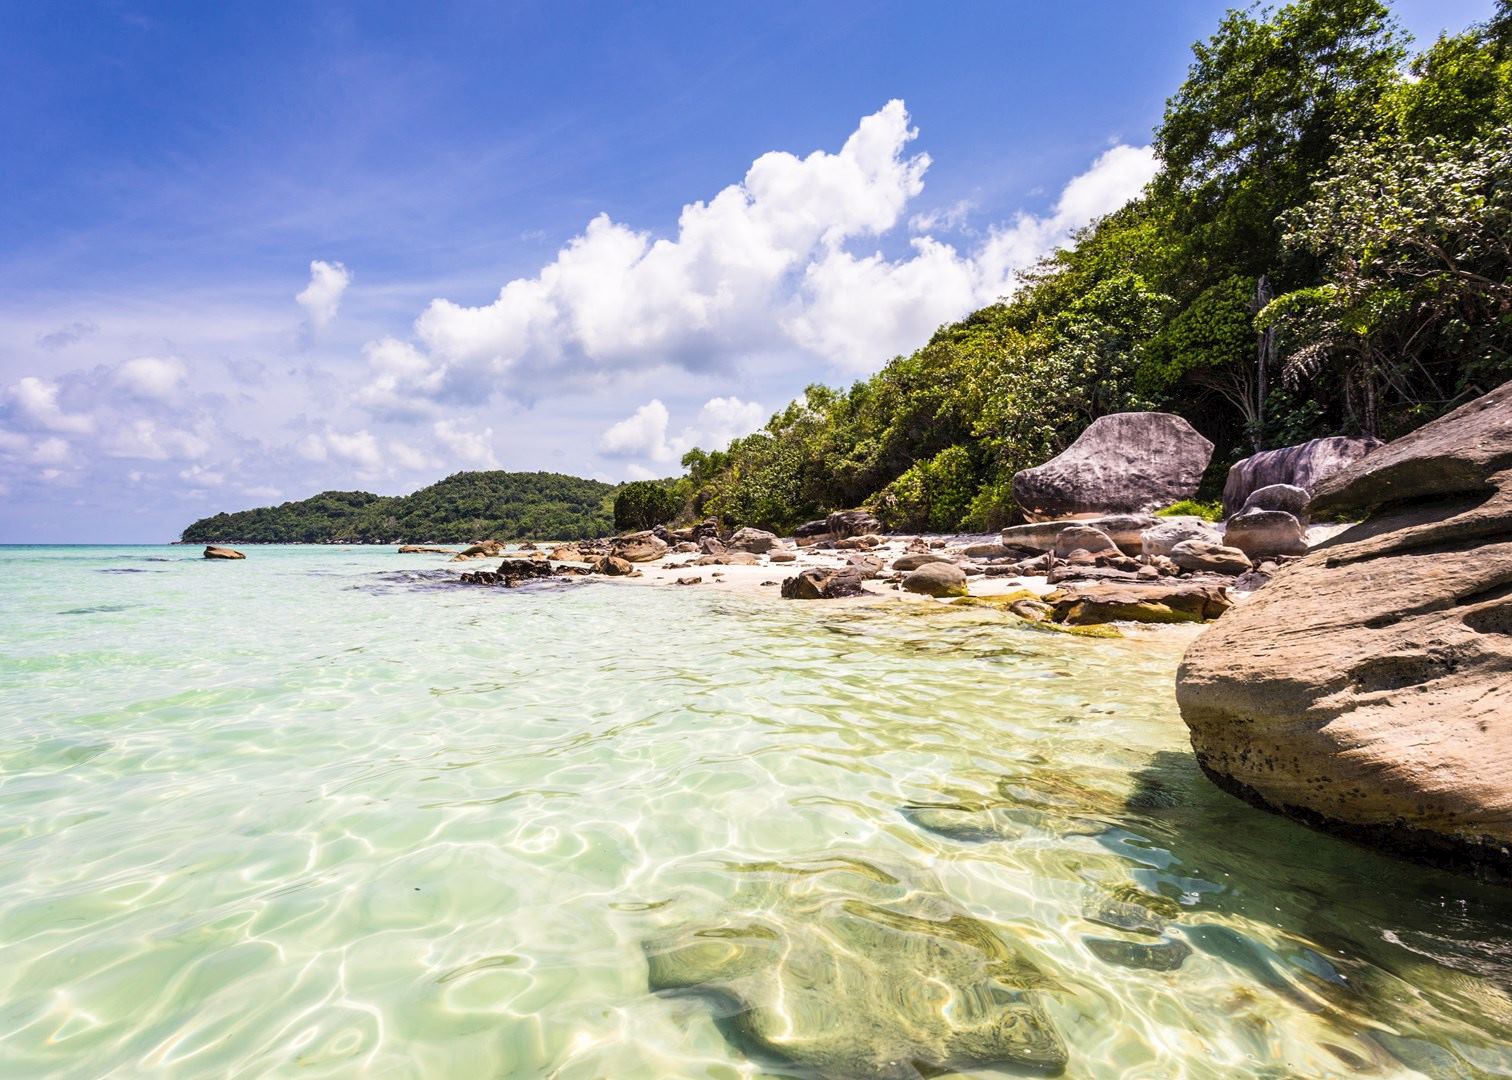 Visit Phu Quoc on a trip to Vietnam | Audley Travel